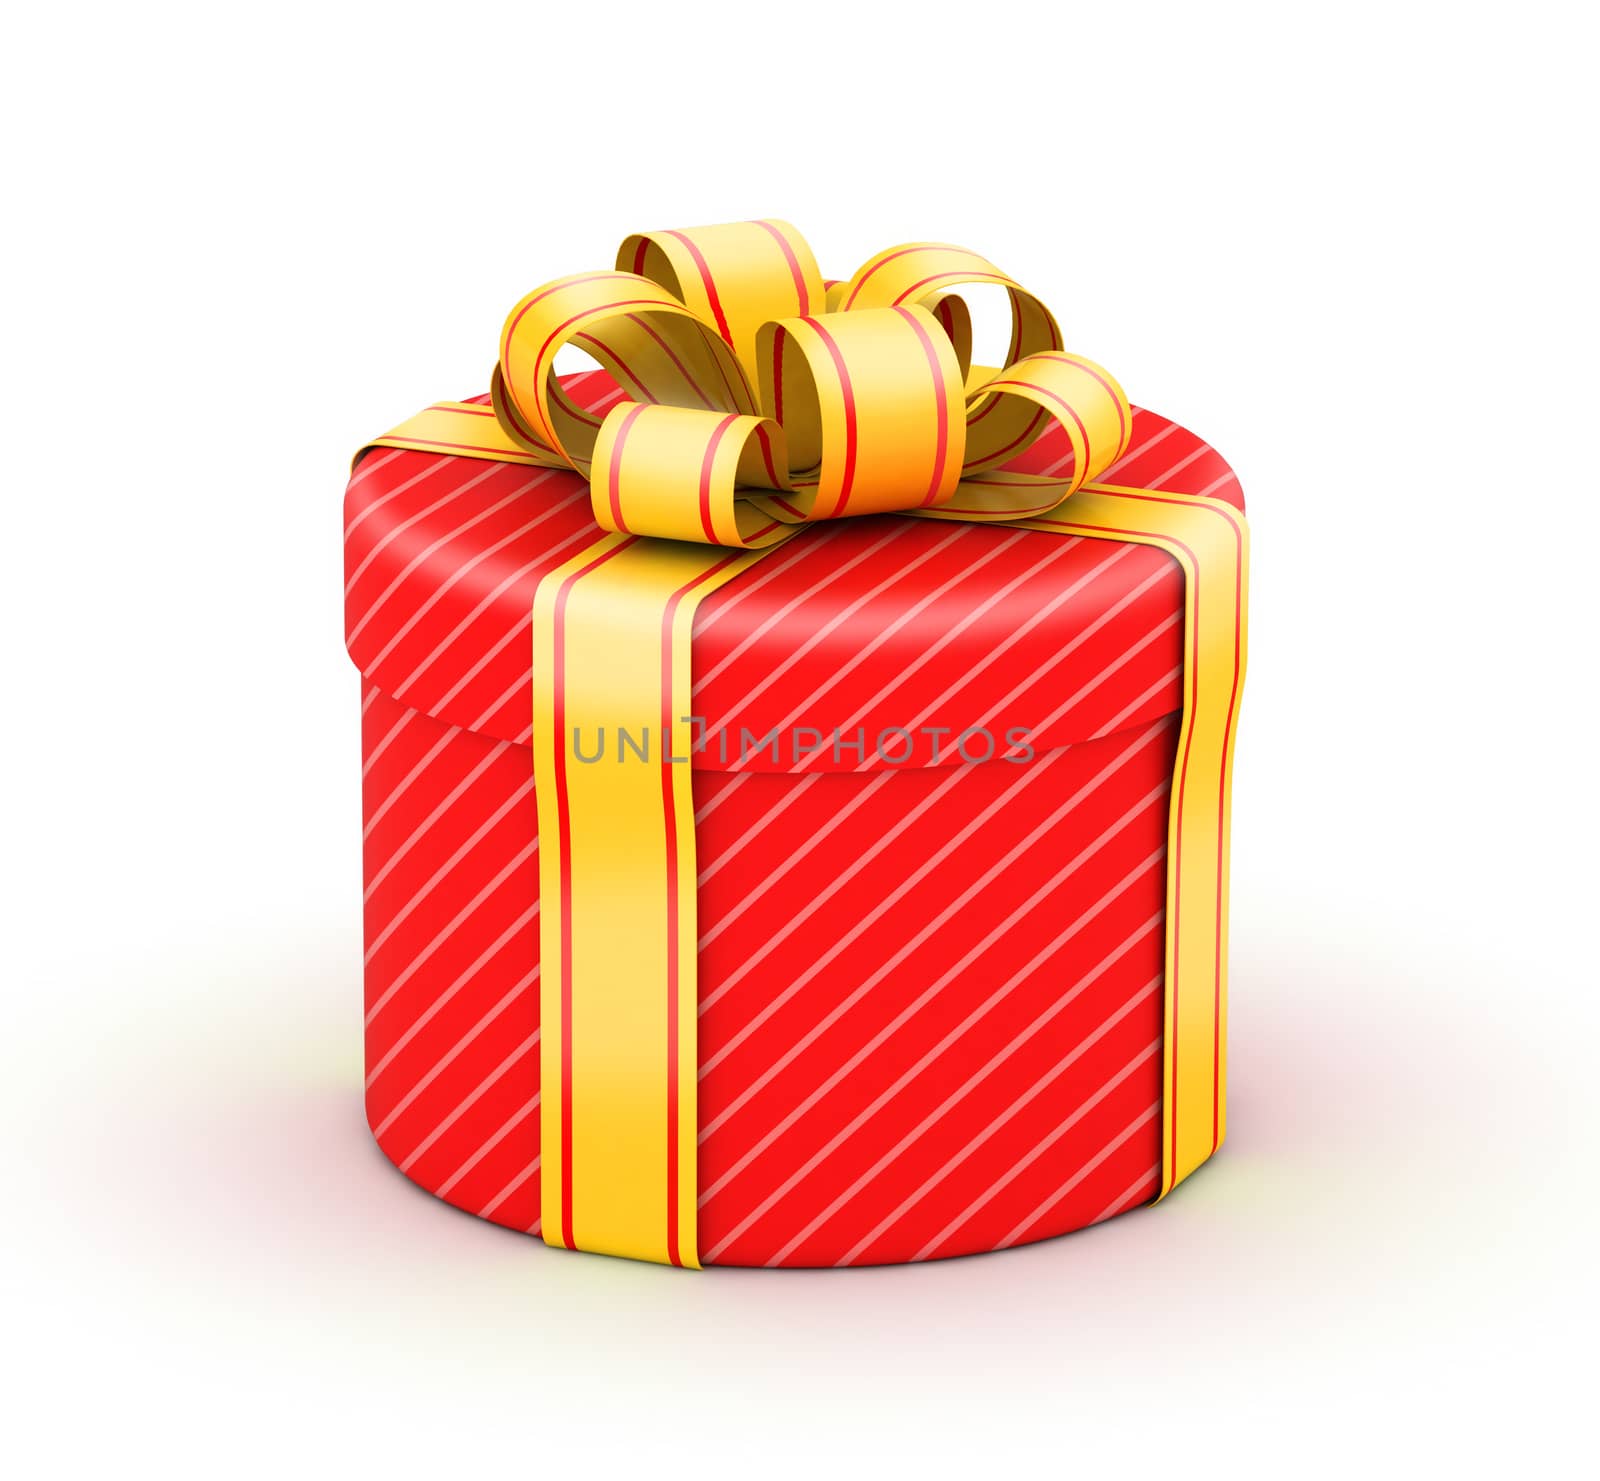 Rounded cylinder red gift box with gold ribbons